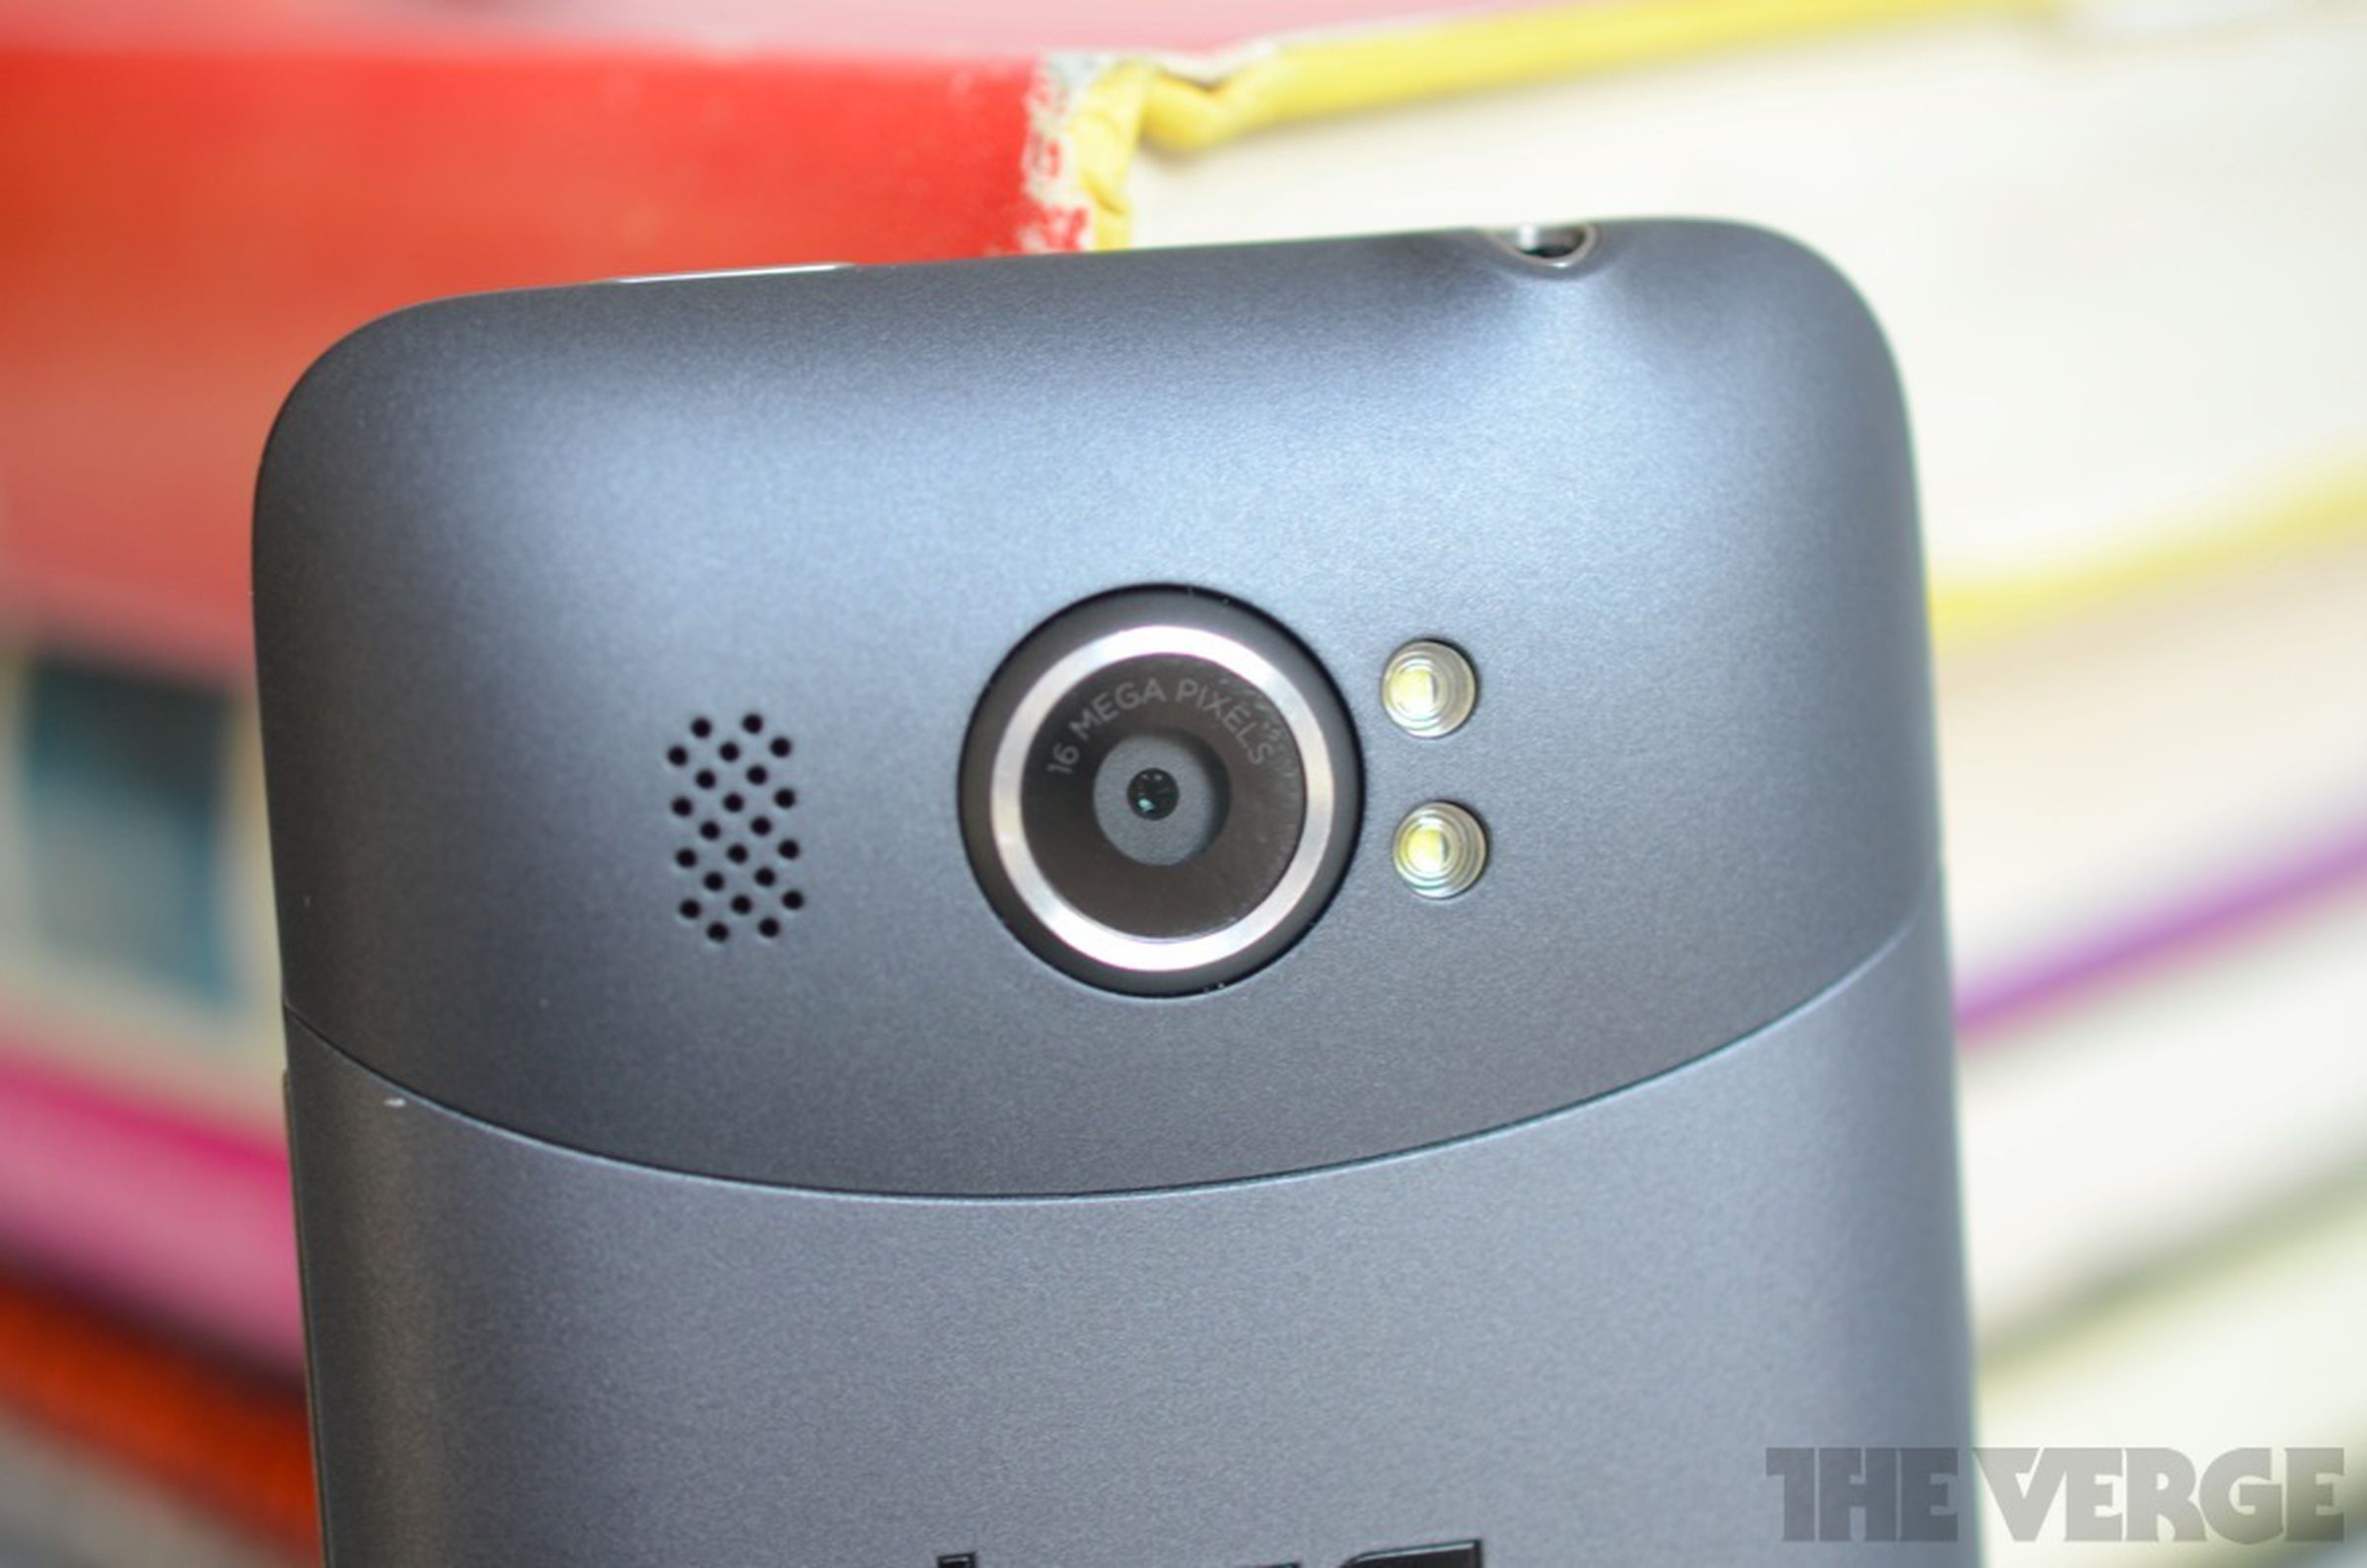 HTC Titan II review pictures